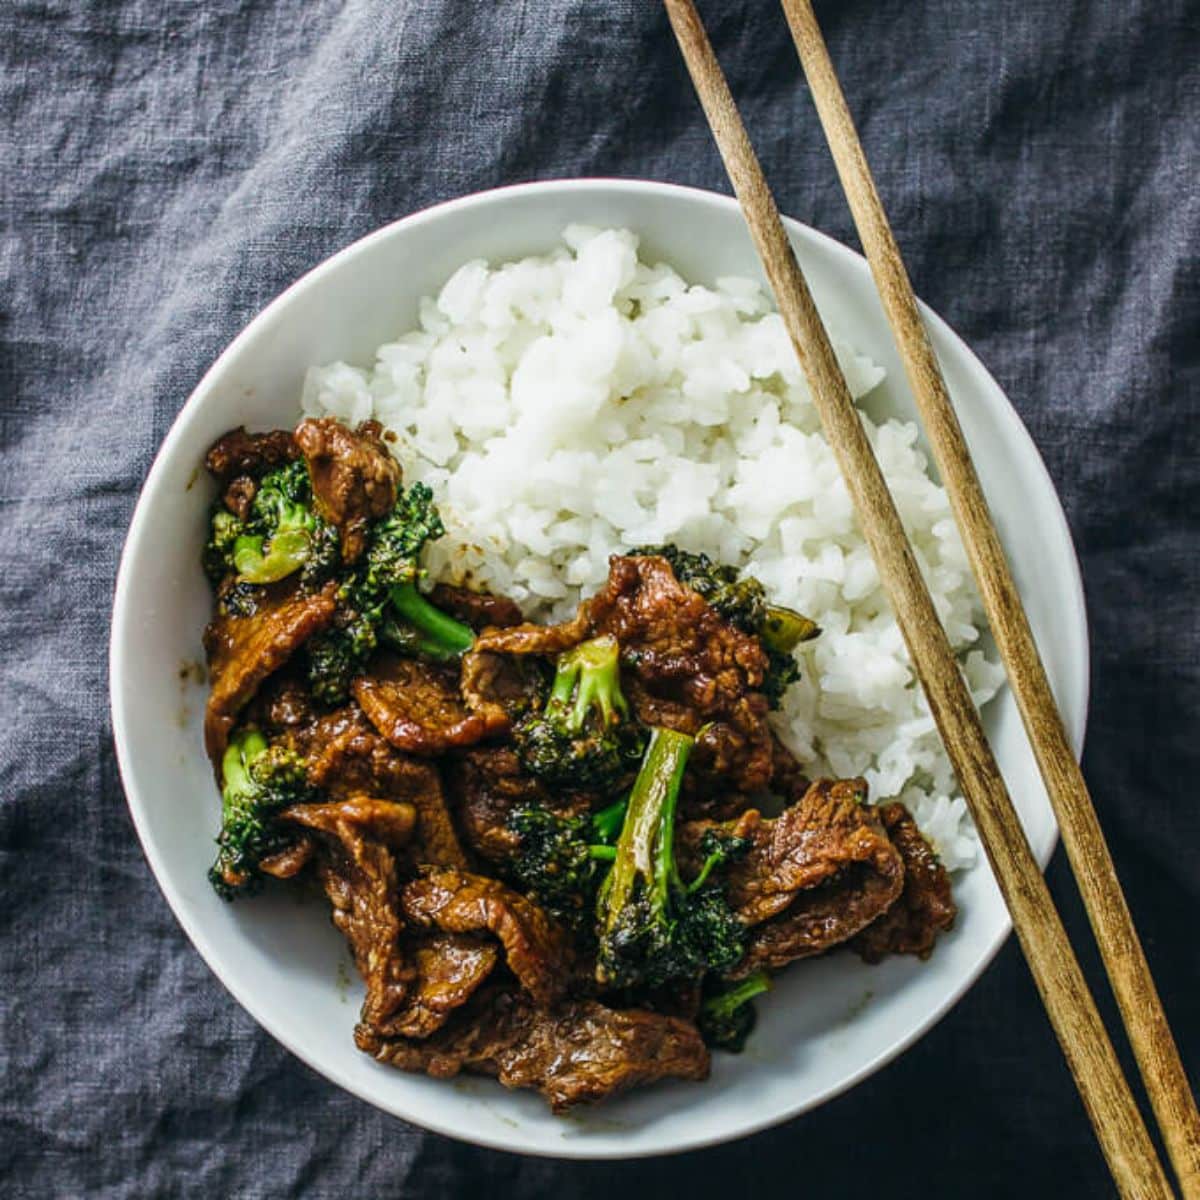 Healthy Beef And Broccoli with rice in a white plate with wooden chopsticks.